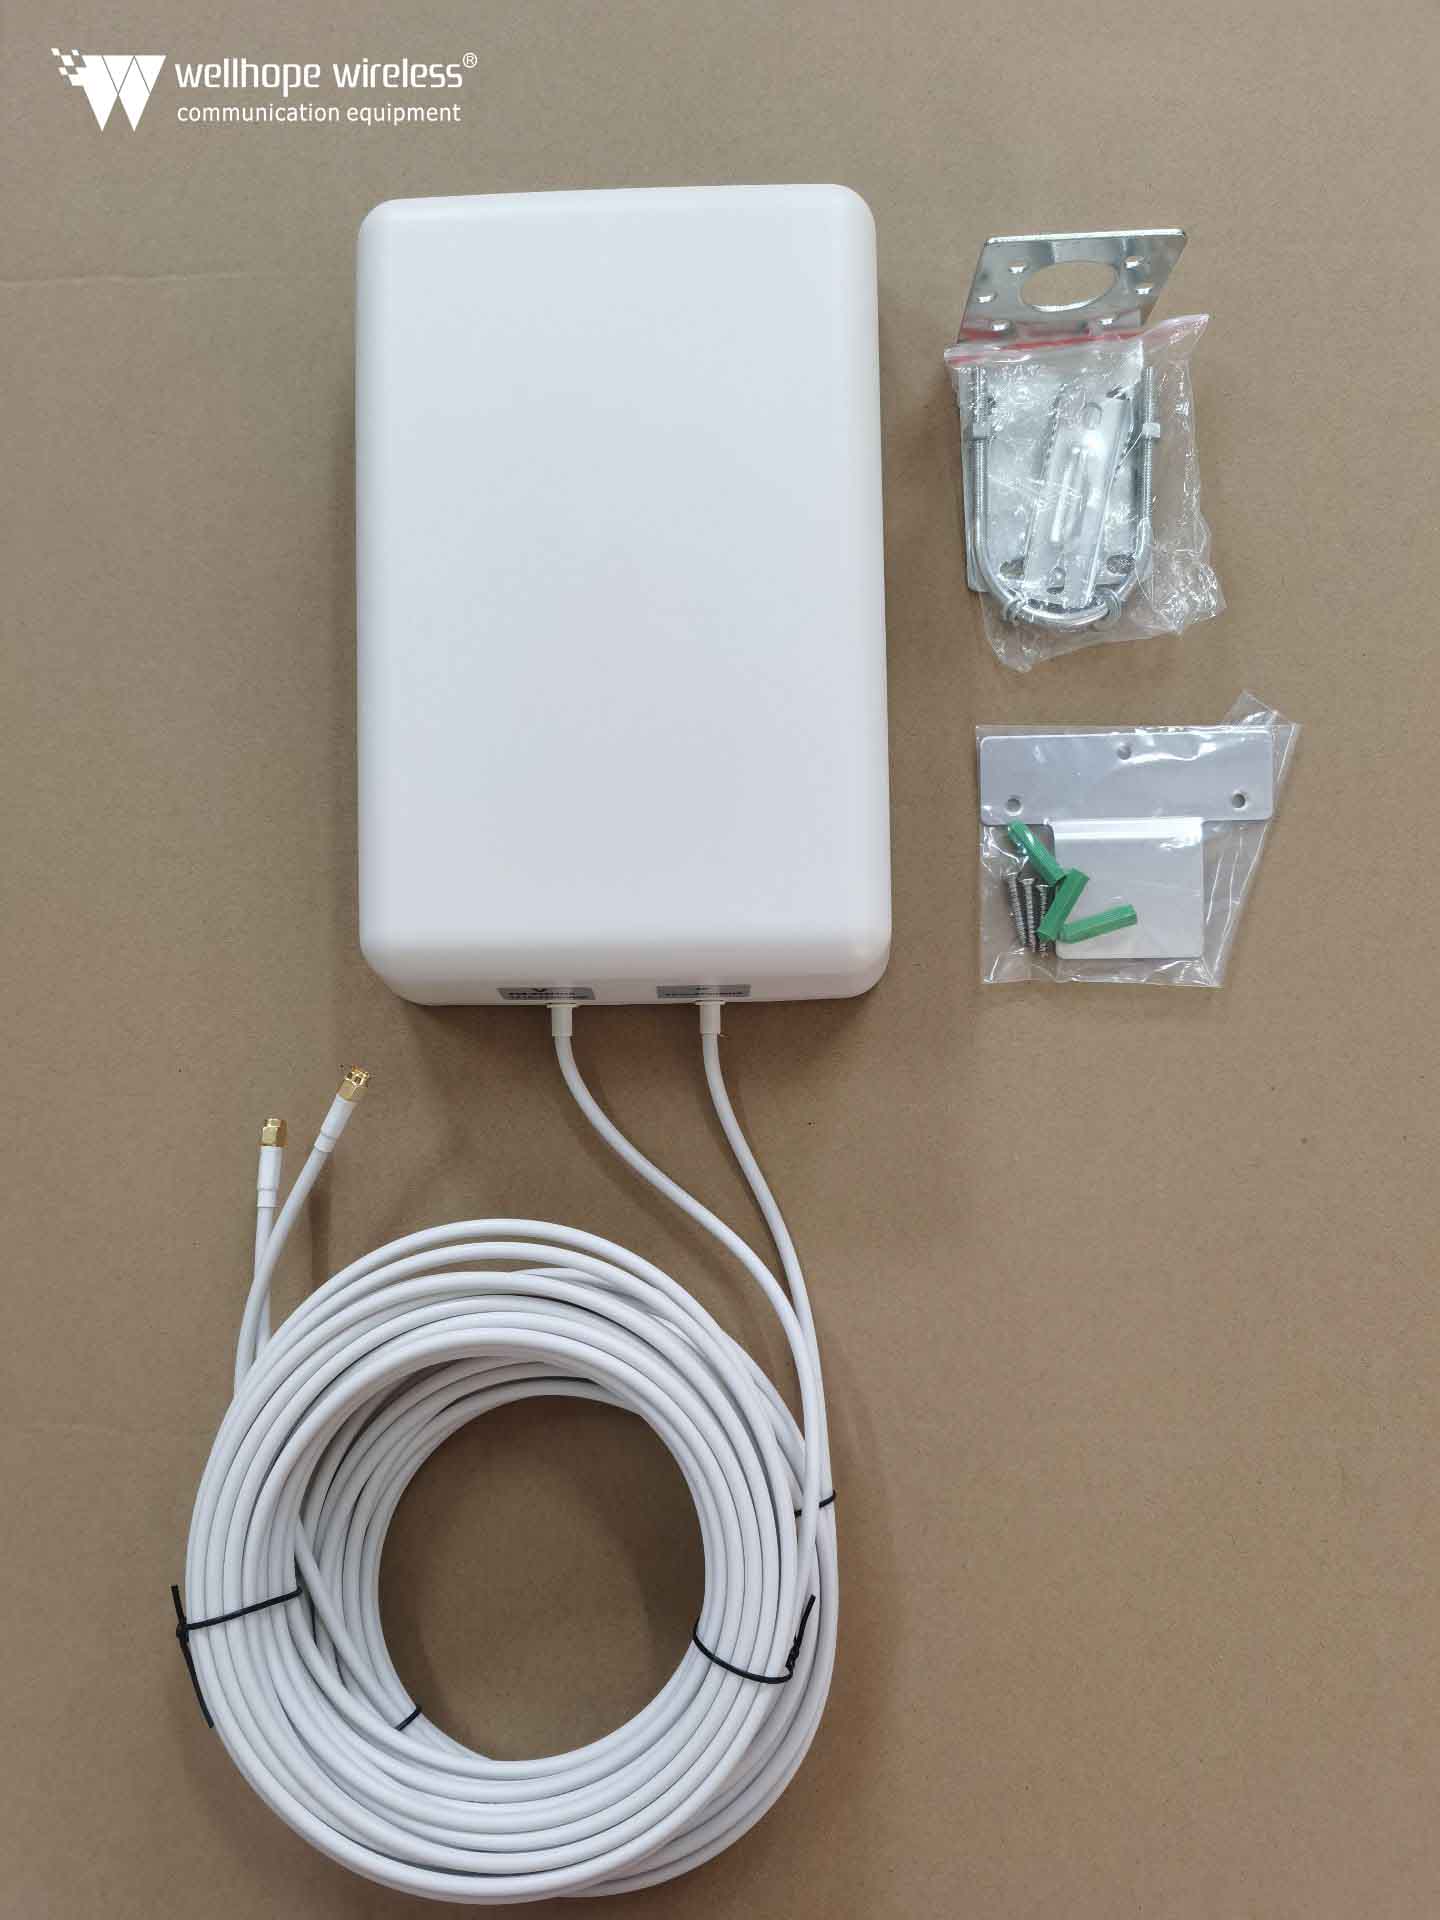 4G indoor and outdoor patch antenna